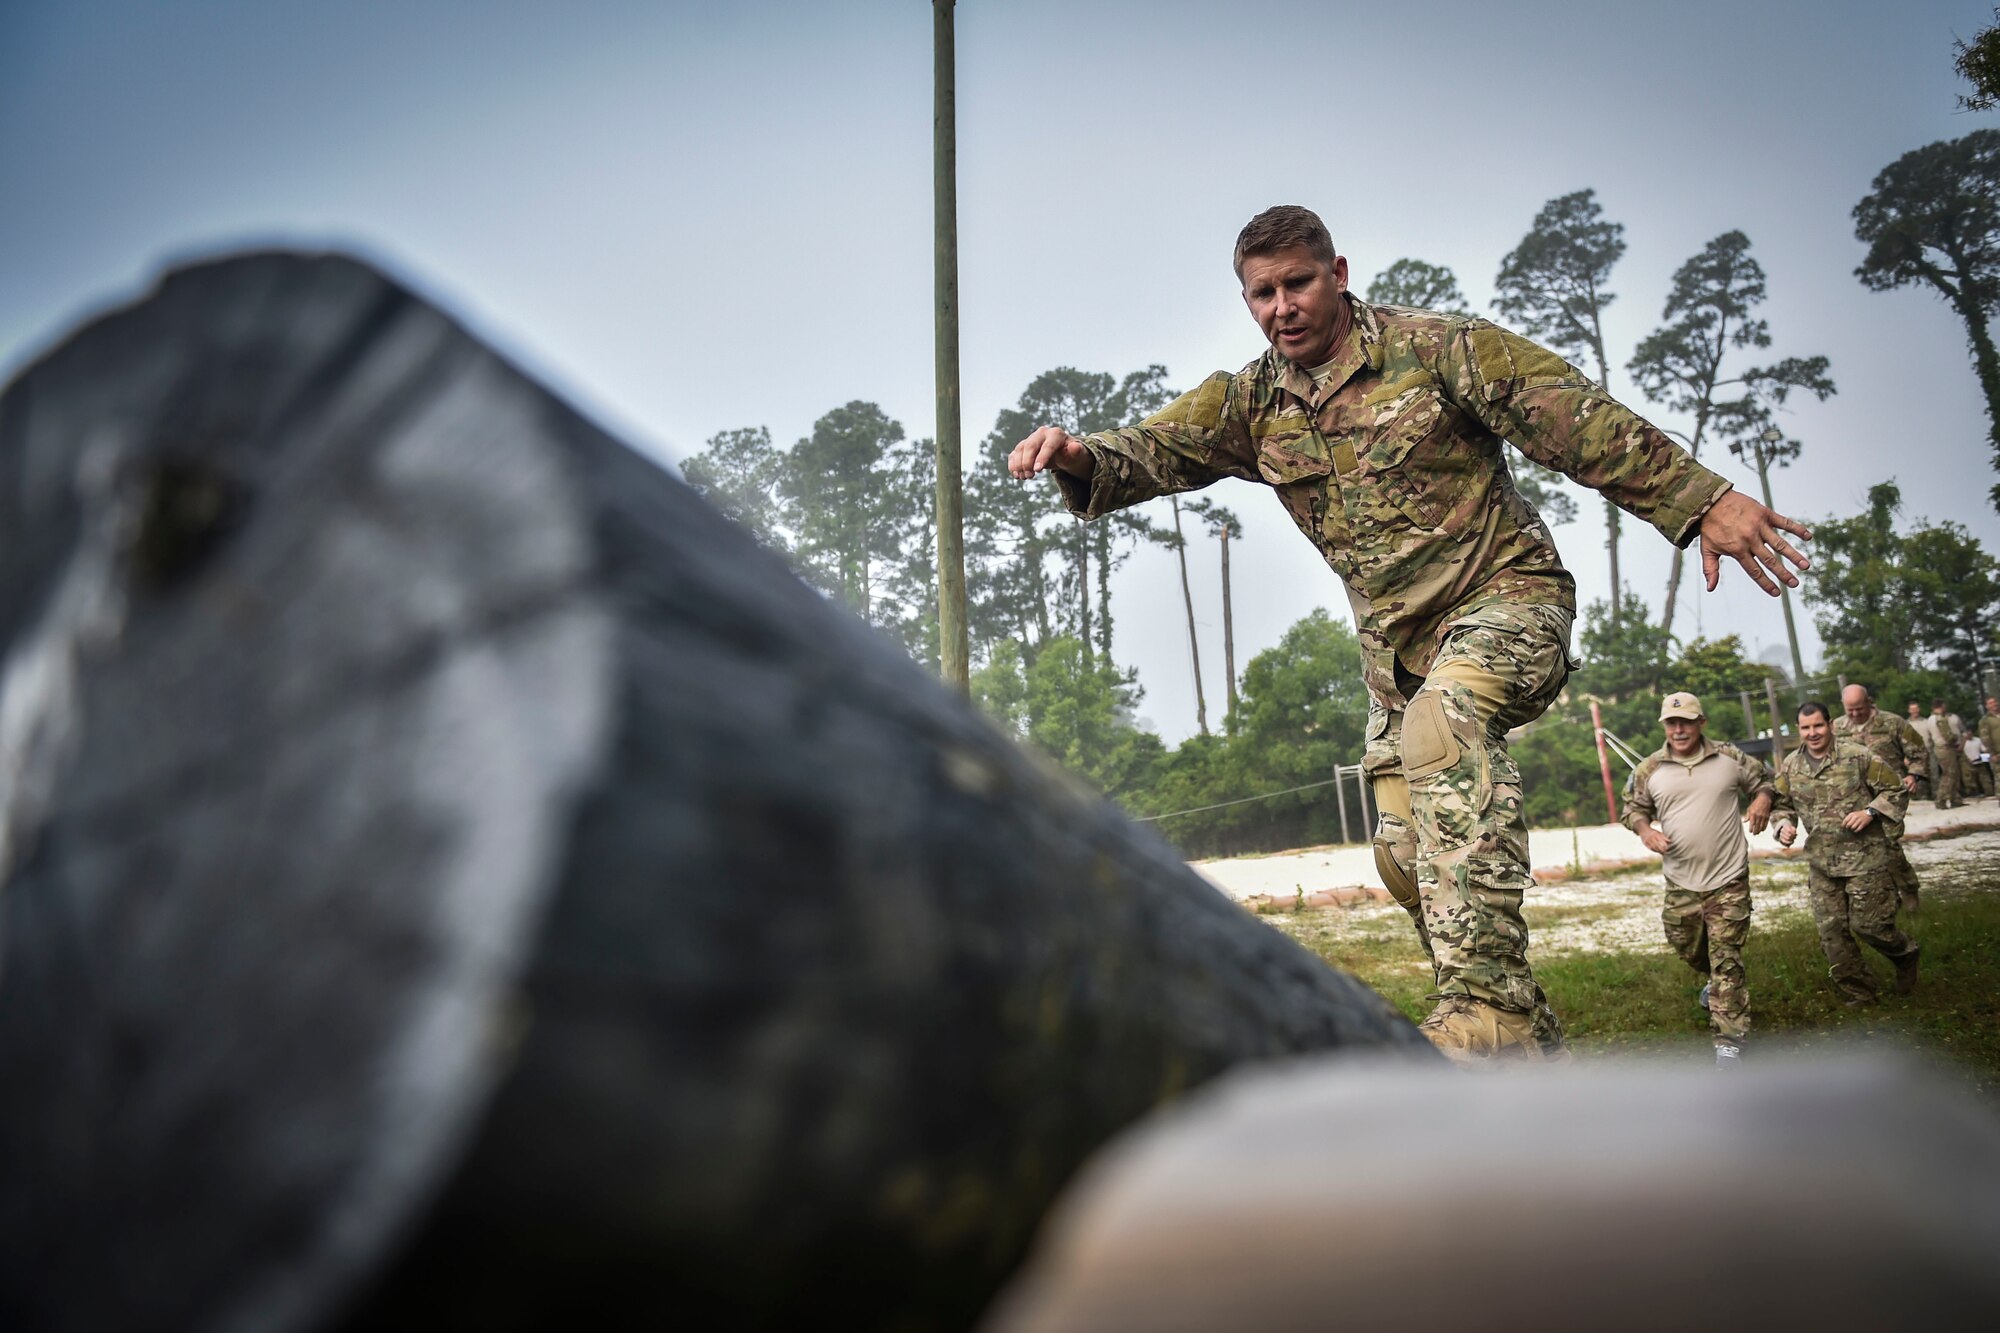 Special Tactics members assigned to the 24th Special Operations Wing complete an obstacle during a Monster Mash at Hurlburt Field, Fla., May 12, 2016. Monster Mash is a long-standing Special Tactics training tradition, consisting of an obstacle course where special operators complete timed scenarios at different stations of core mission training. The event was held in honor of Chief Master Sgt. Bruce W. Dixon, the command chief of the 24th SOW, who is retiring after a 30-year career as a combat controller. (U.S. Air Force photo by Senior Airman Ryan Conroy)   